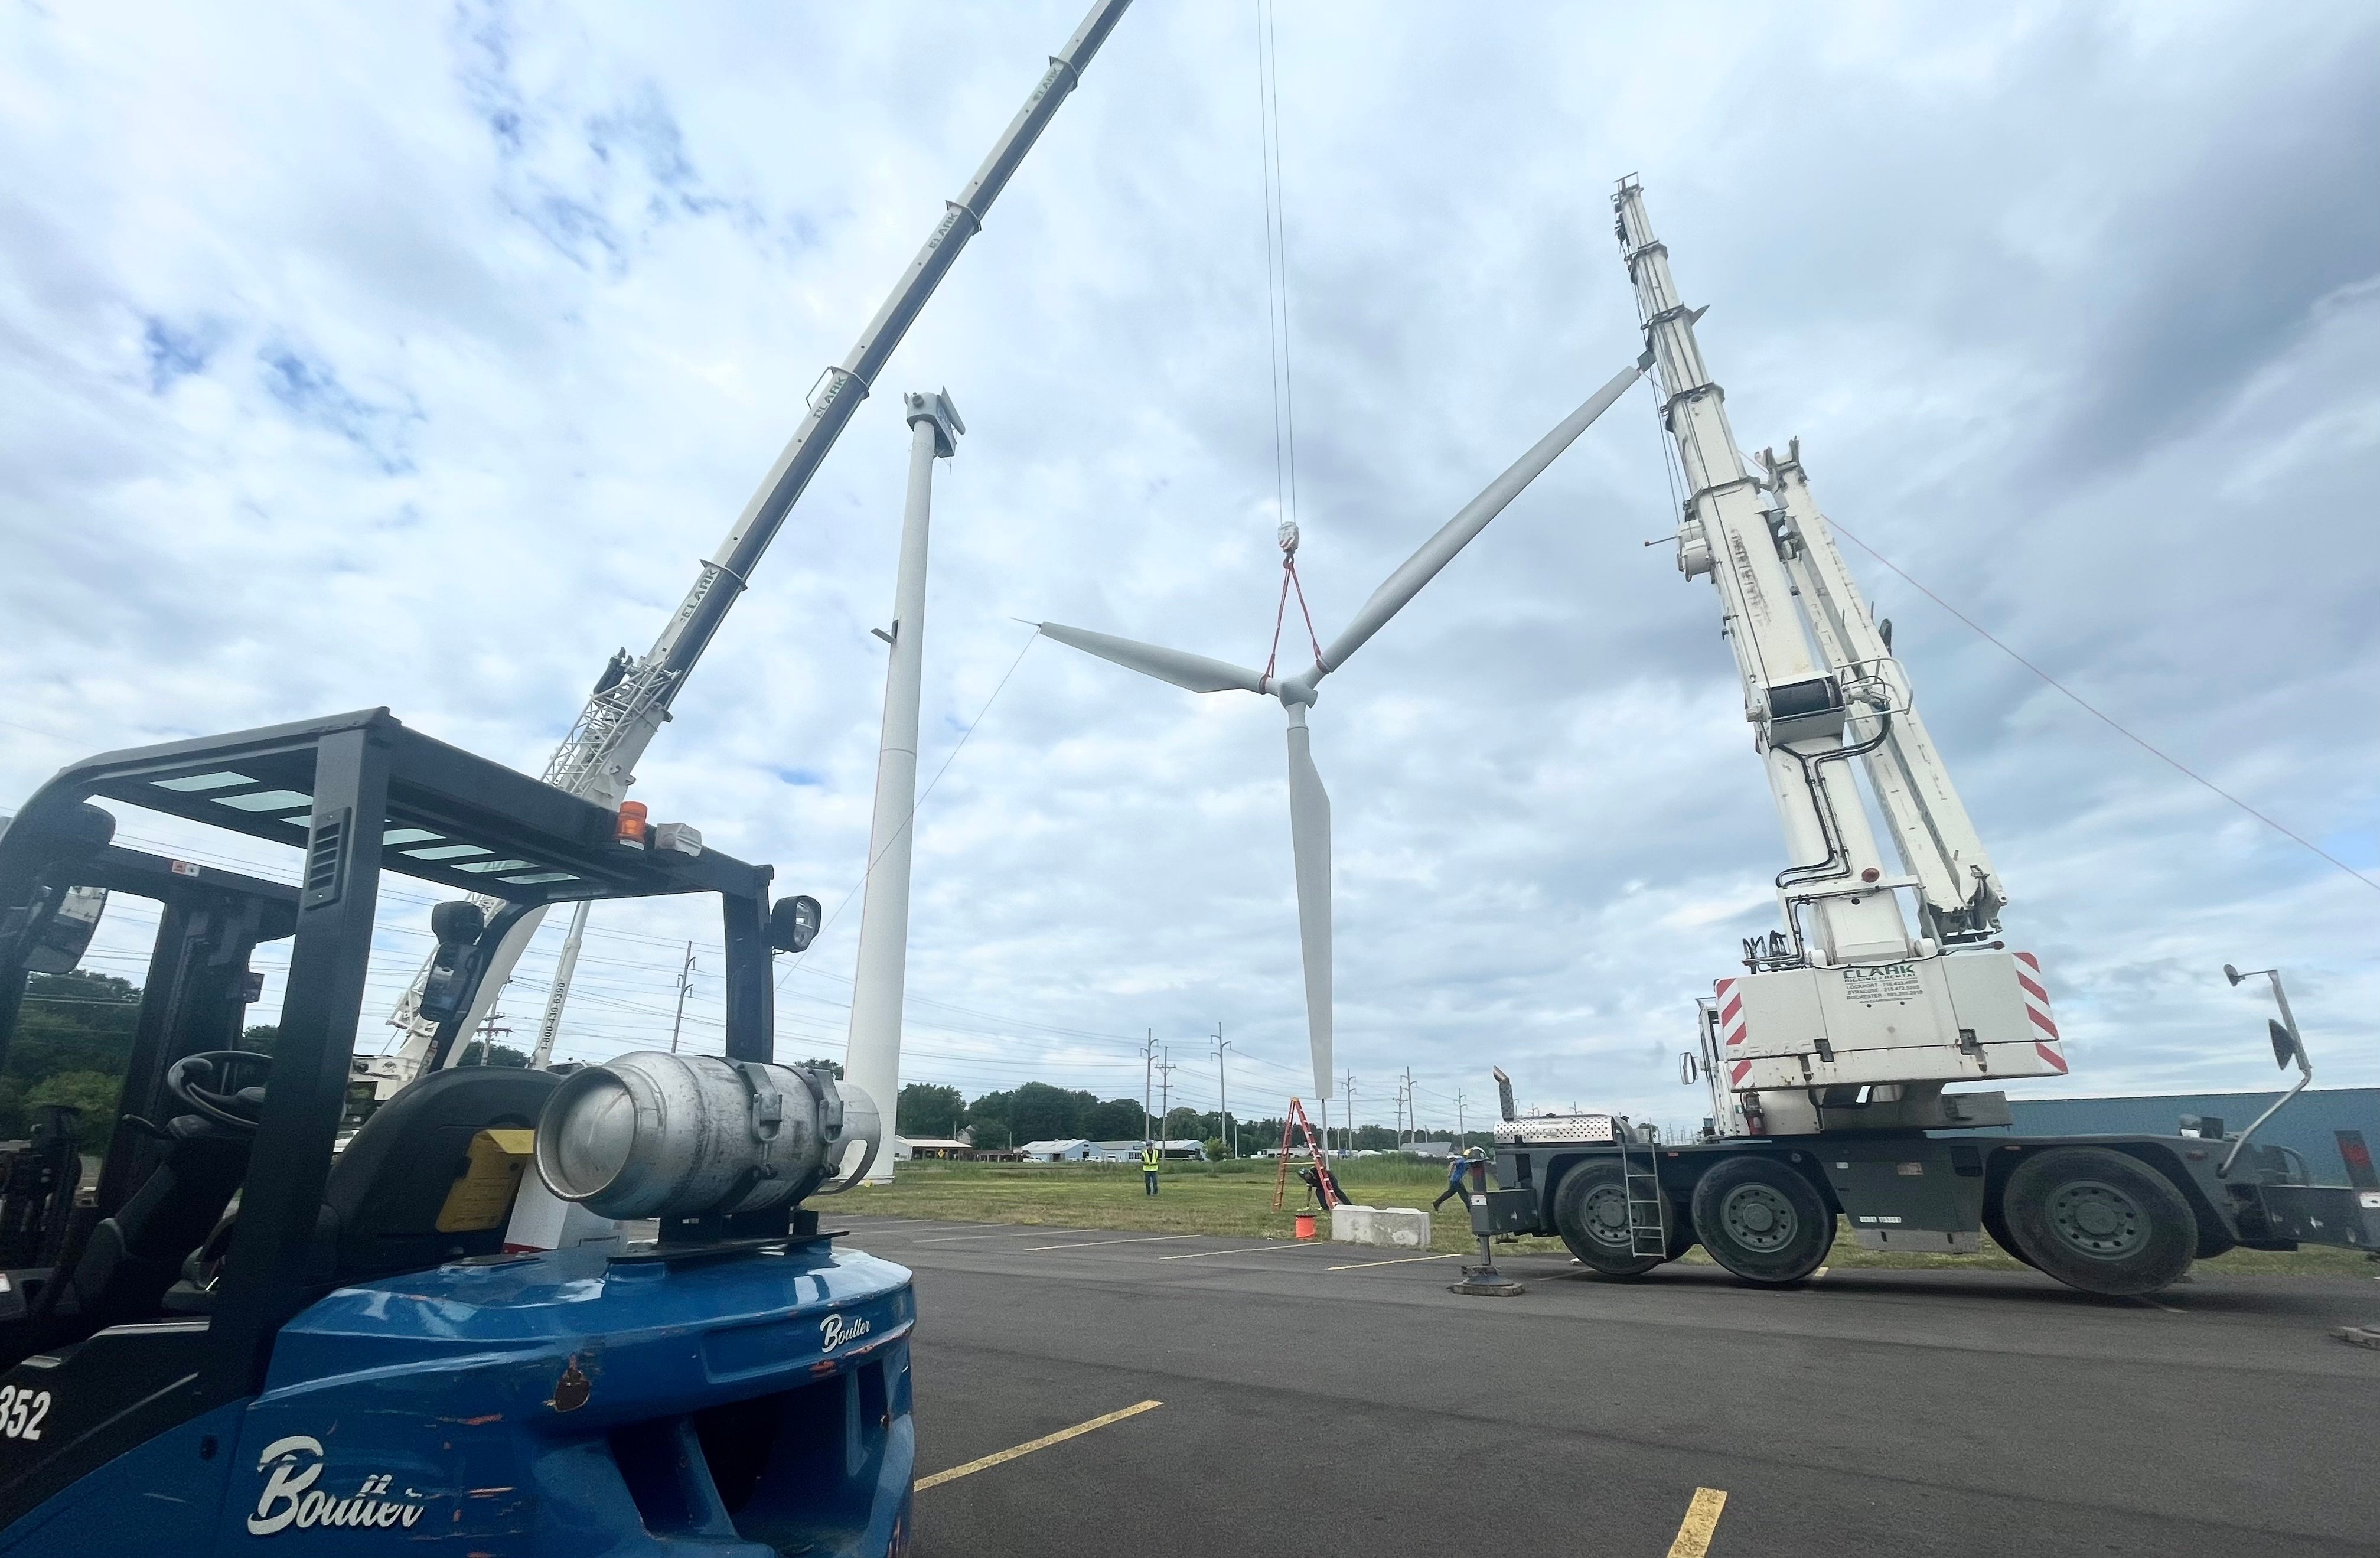 Two large cranes lifting wind turbine blades to remove inside nacelle